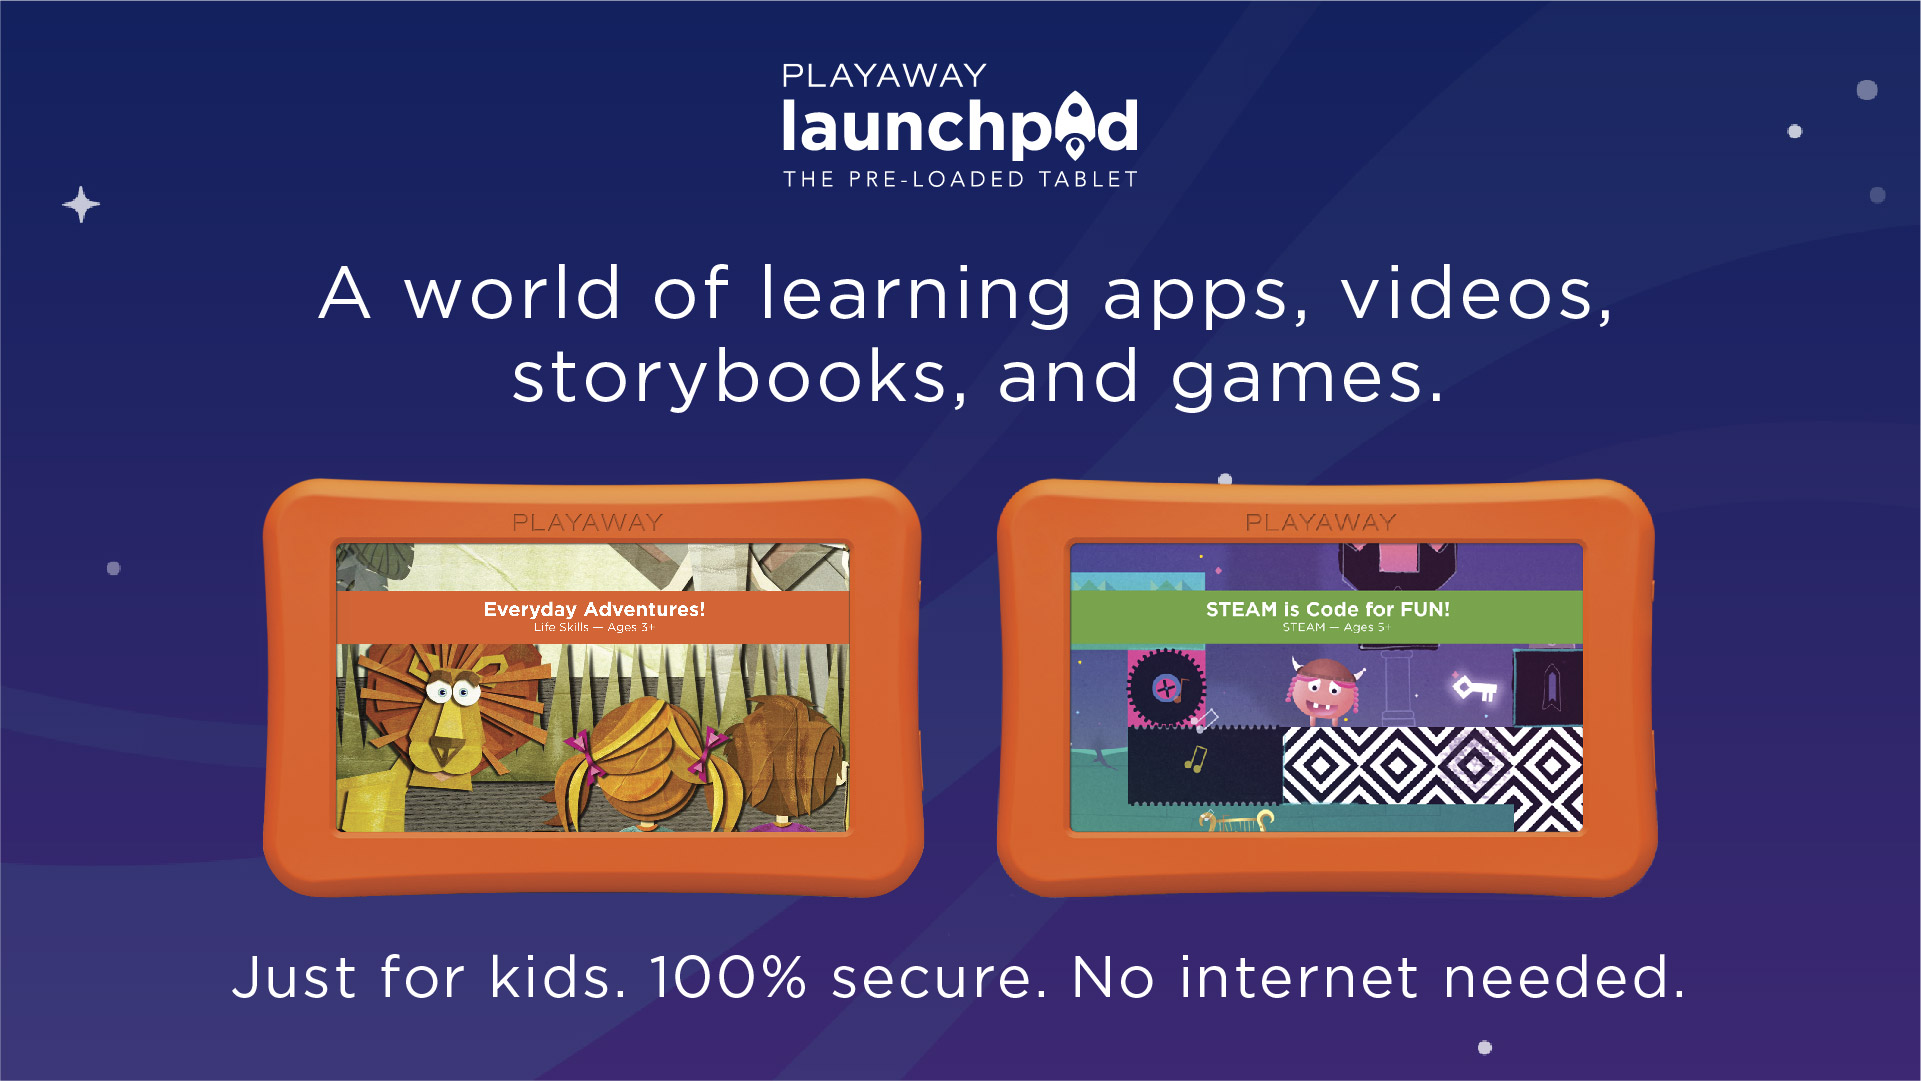 Launchpad tablets with words "Just for kids. 100% secure. No internet needed"